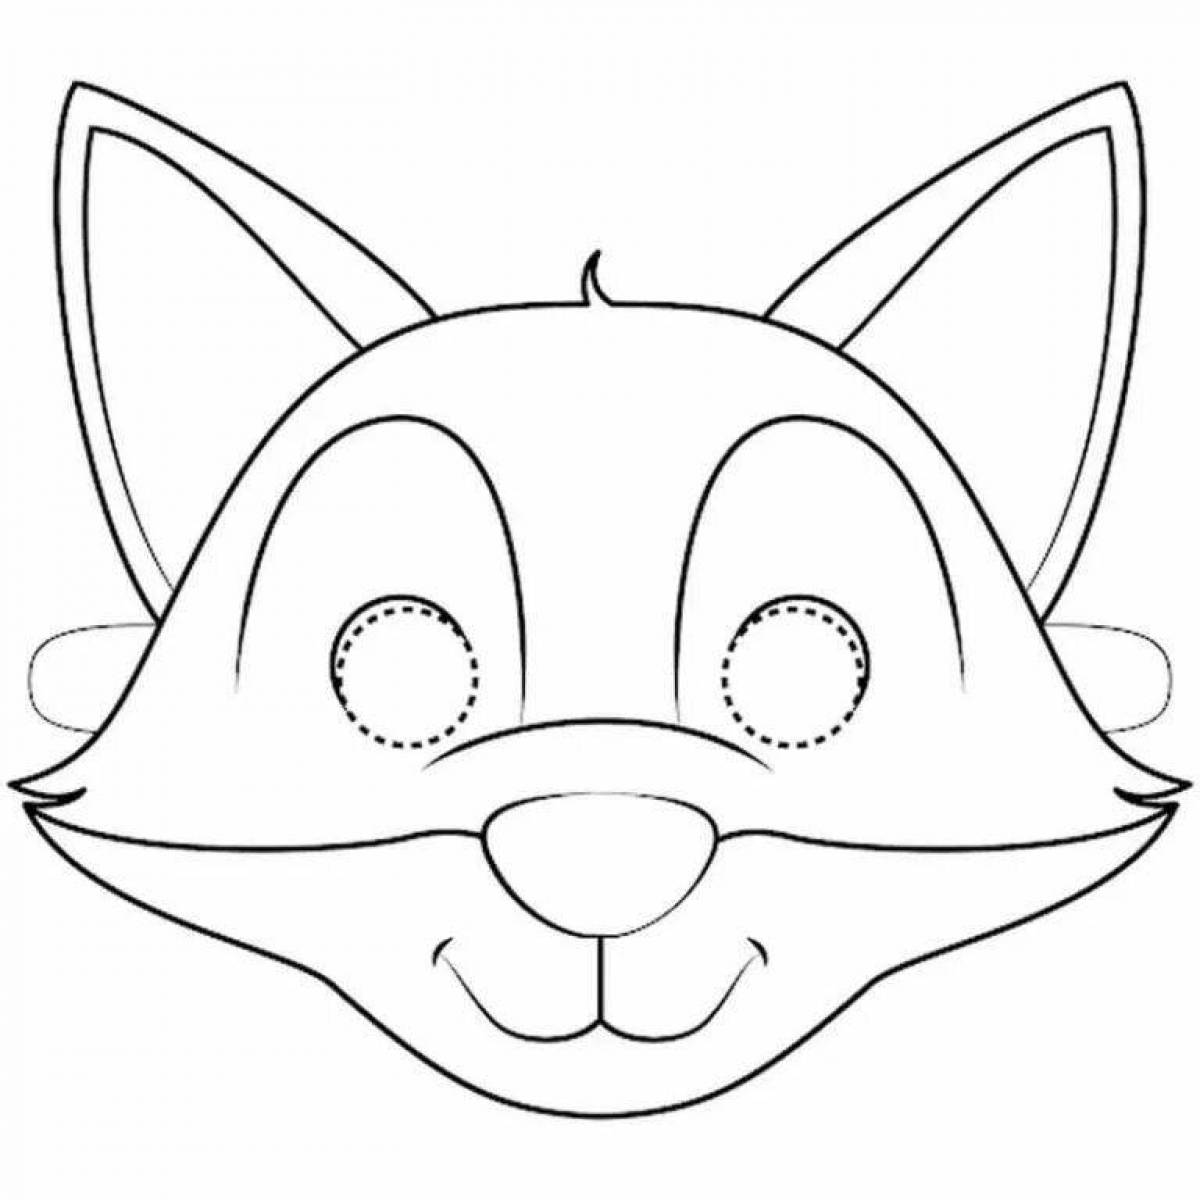 Coloring page adorable masks for kids